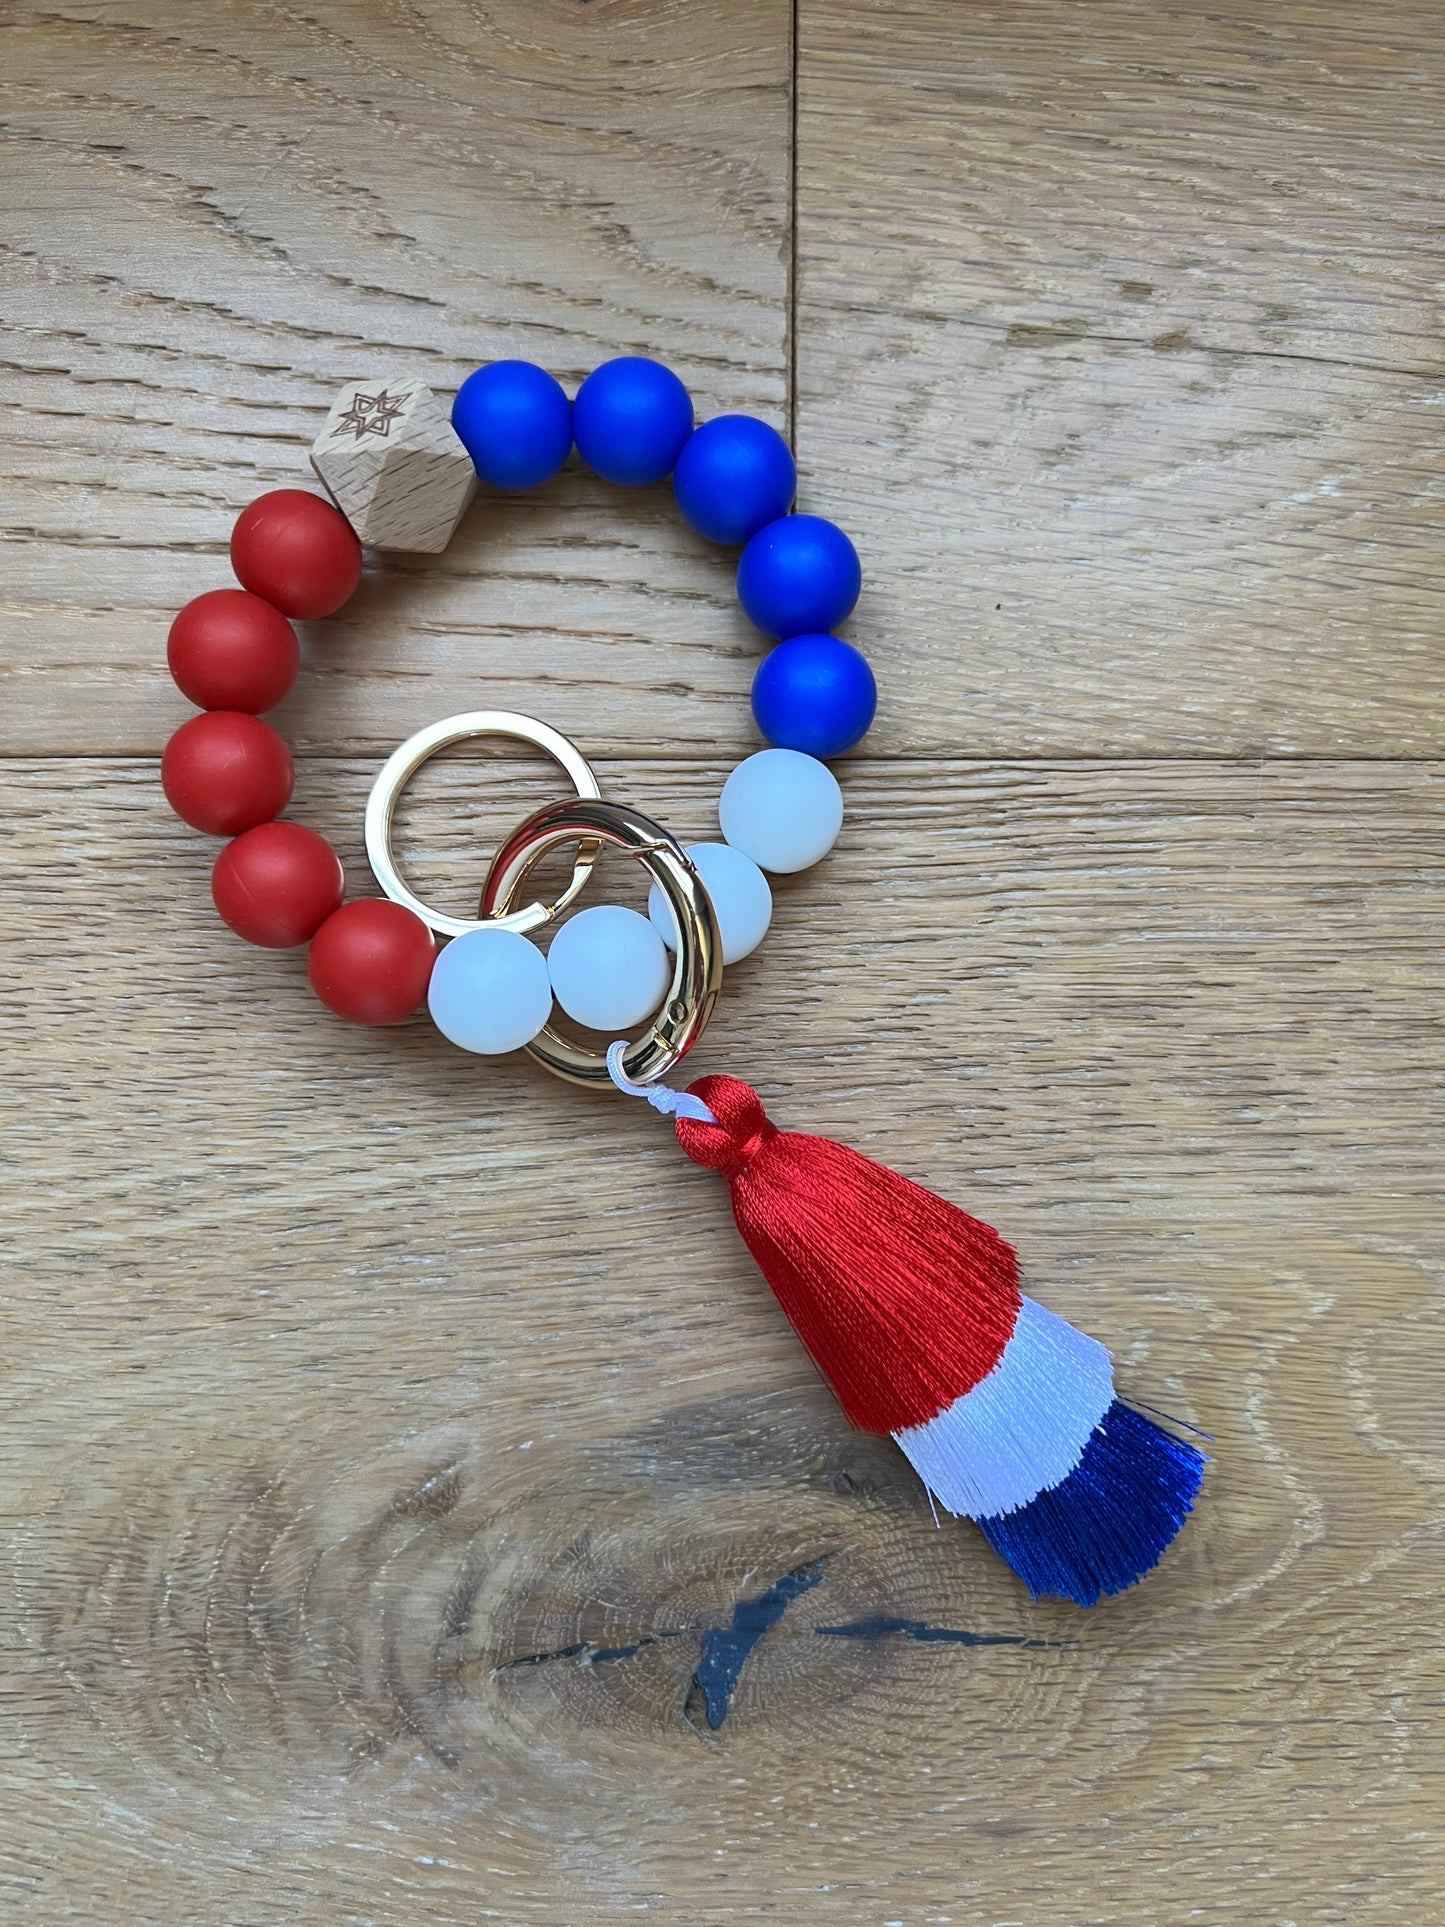 Colorful Beads Tassle Bracelet  Red, White and Blue